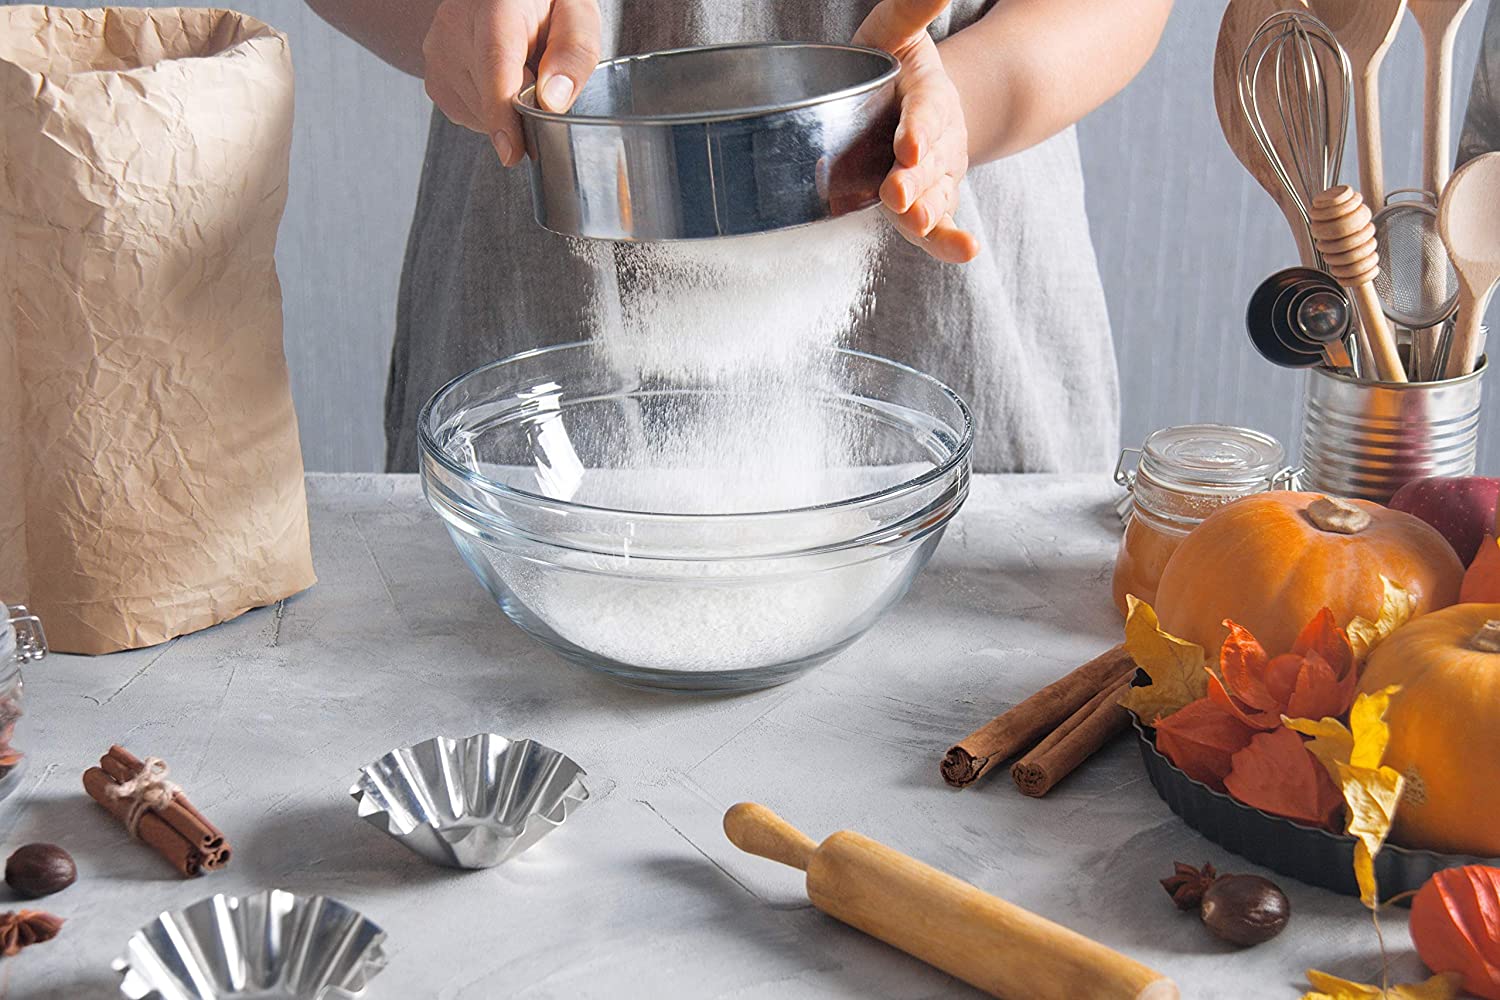 3 cup Crank Flour Sifter - Whisk